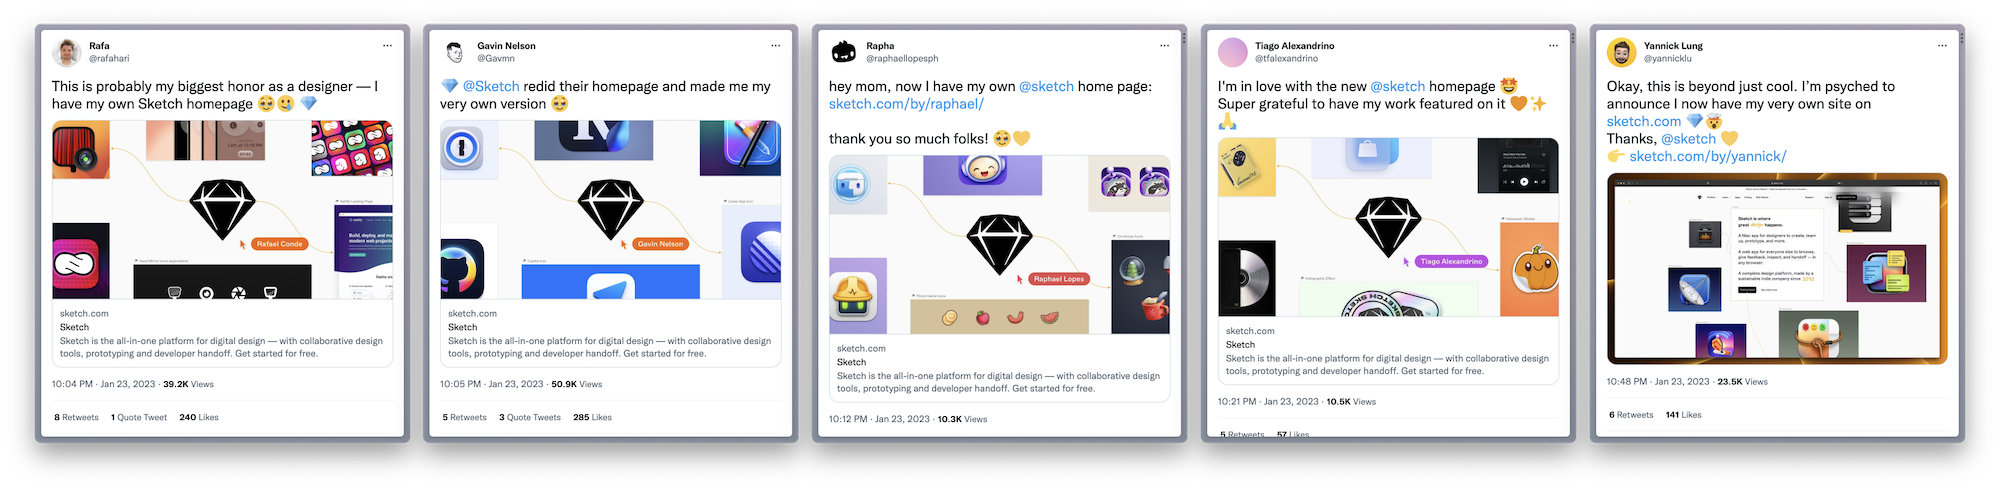 Tweets from designers celebrating Sketch's new homepages